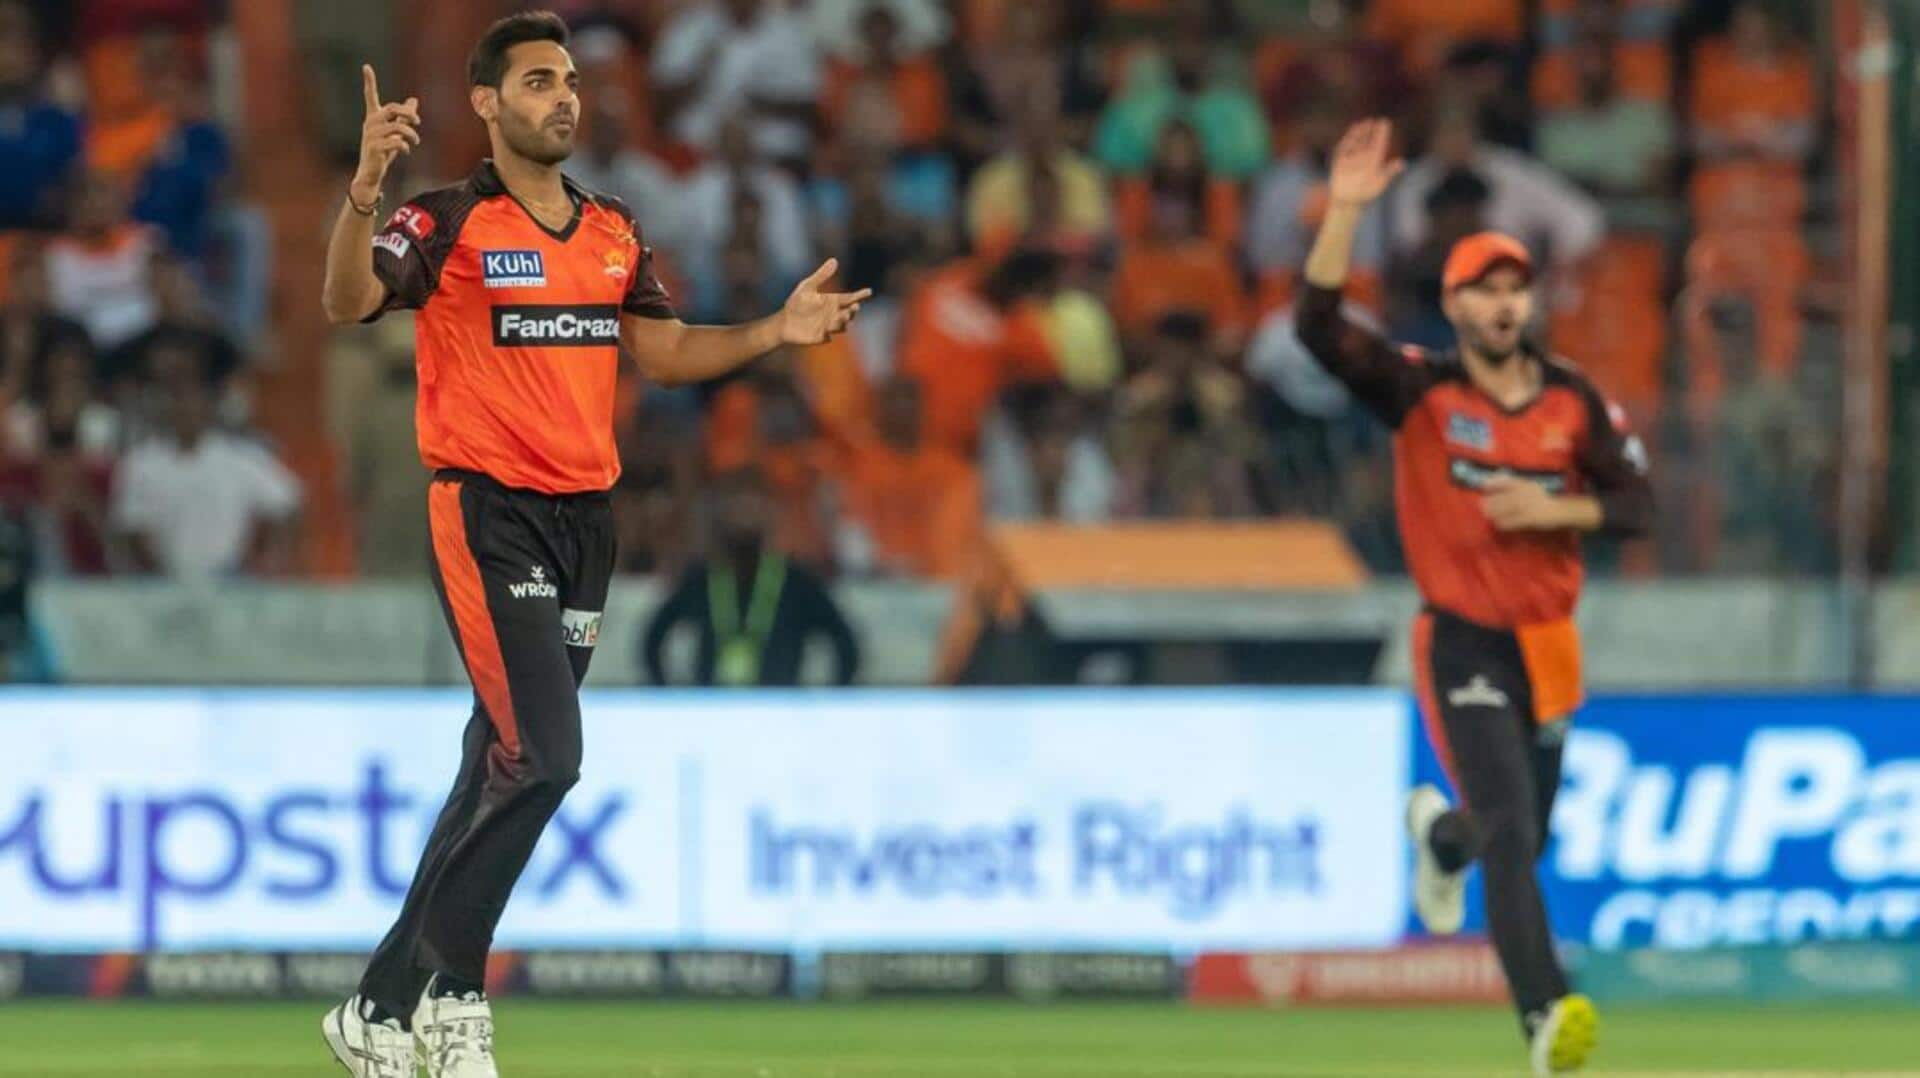 Bhuvneshwar Kumar becomes first bowler with 150 wickets for SRH